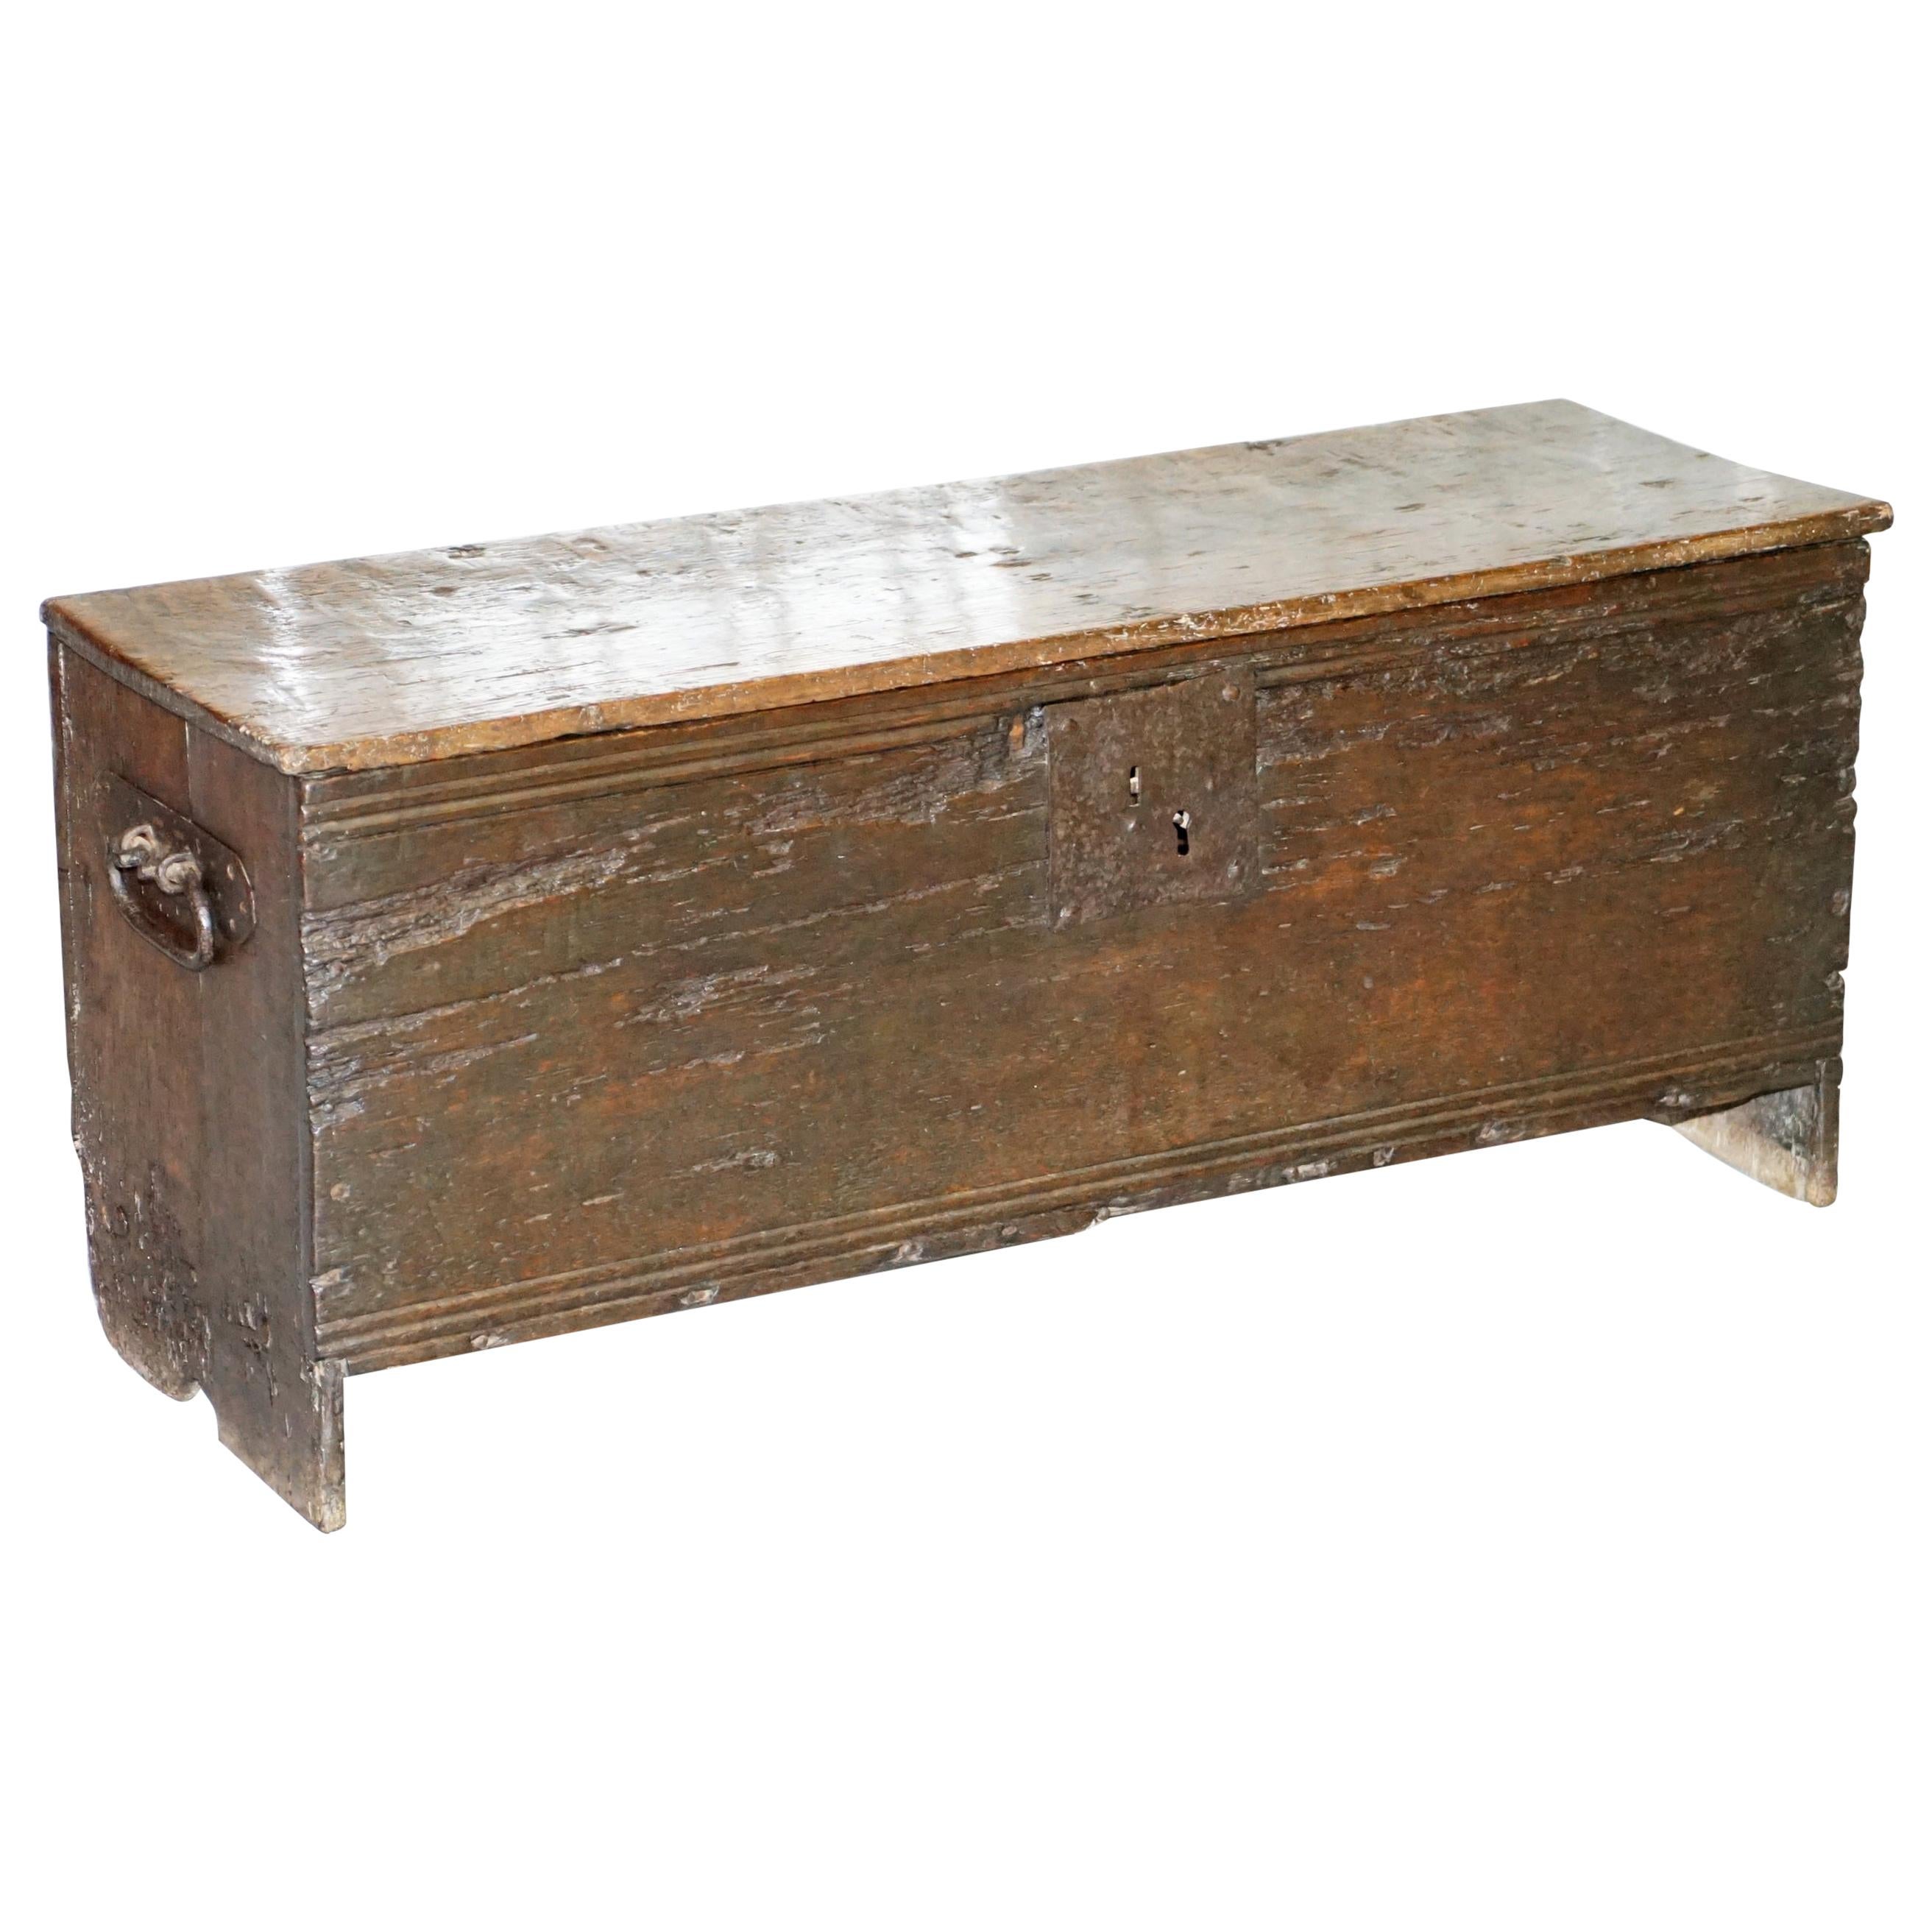 18th Century circa 1720 Solid Oak Six Plank Coffer Trunk Chest Thick Iron Handle